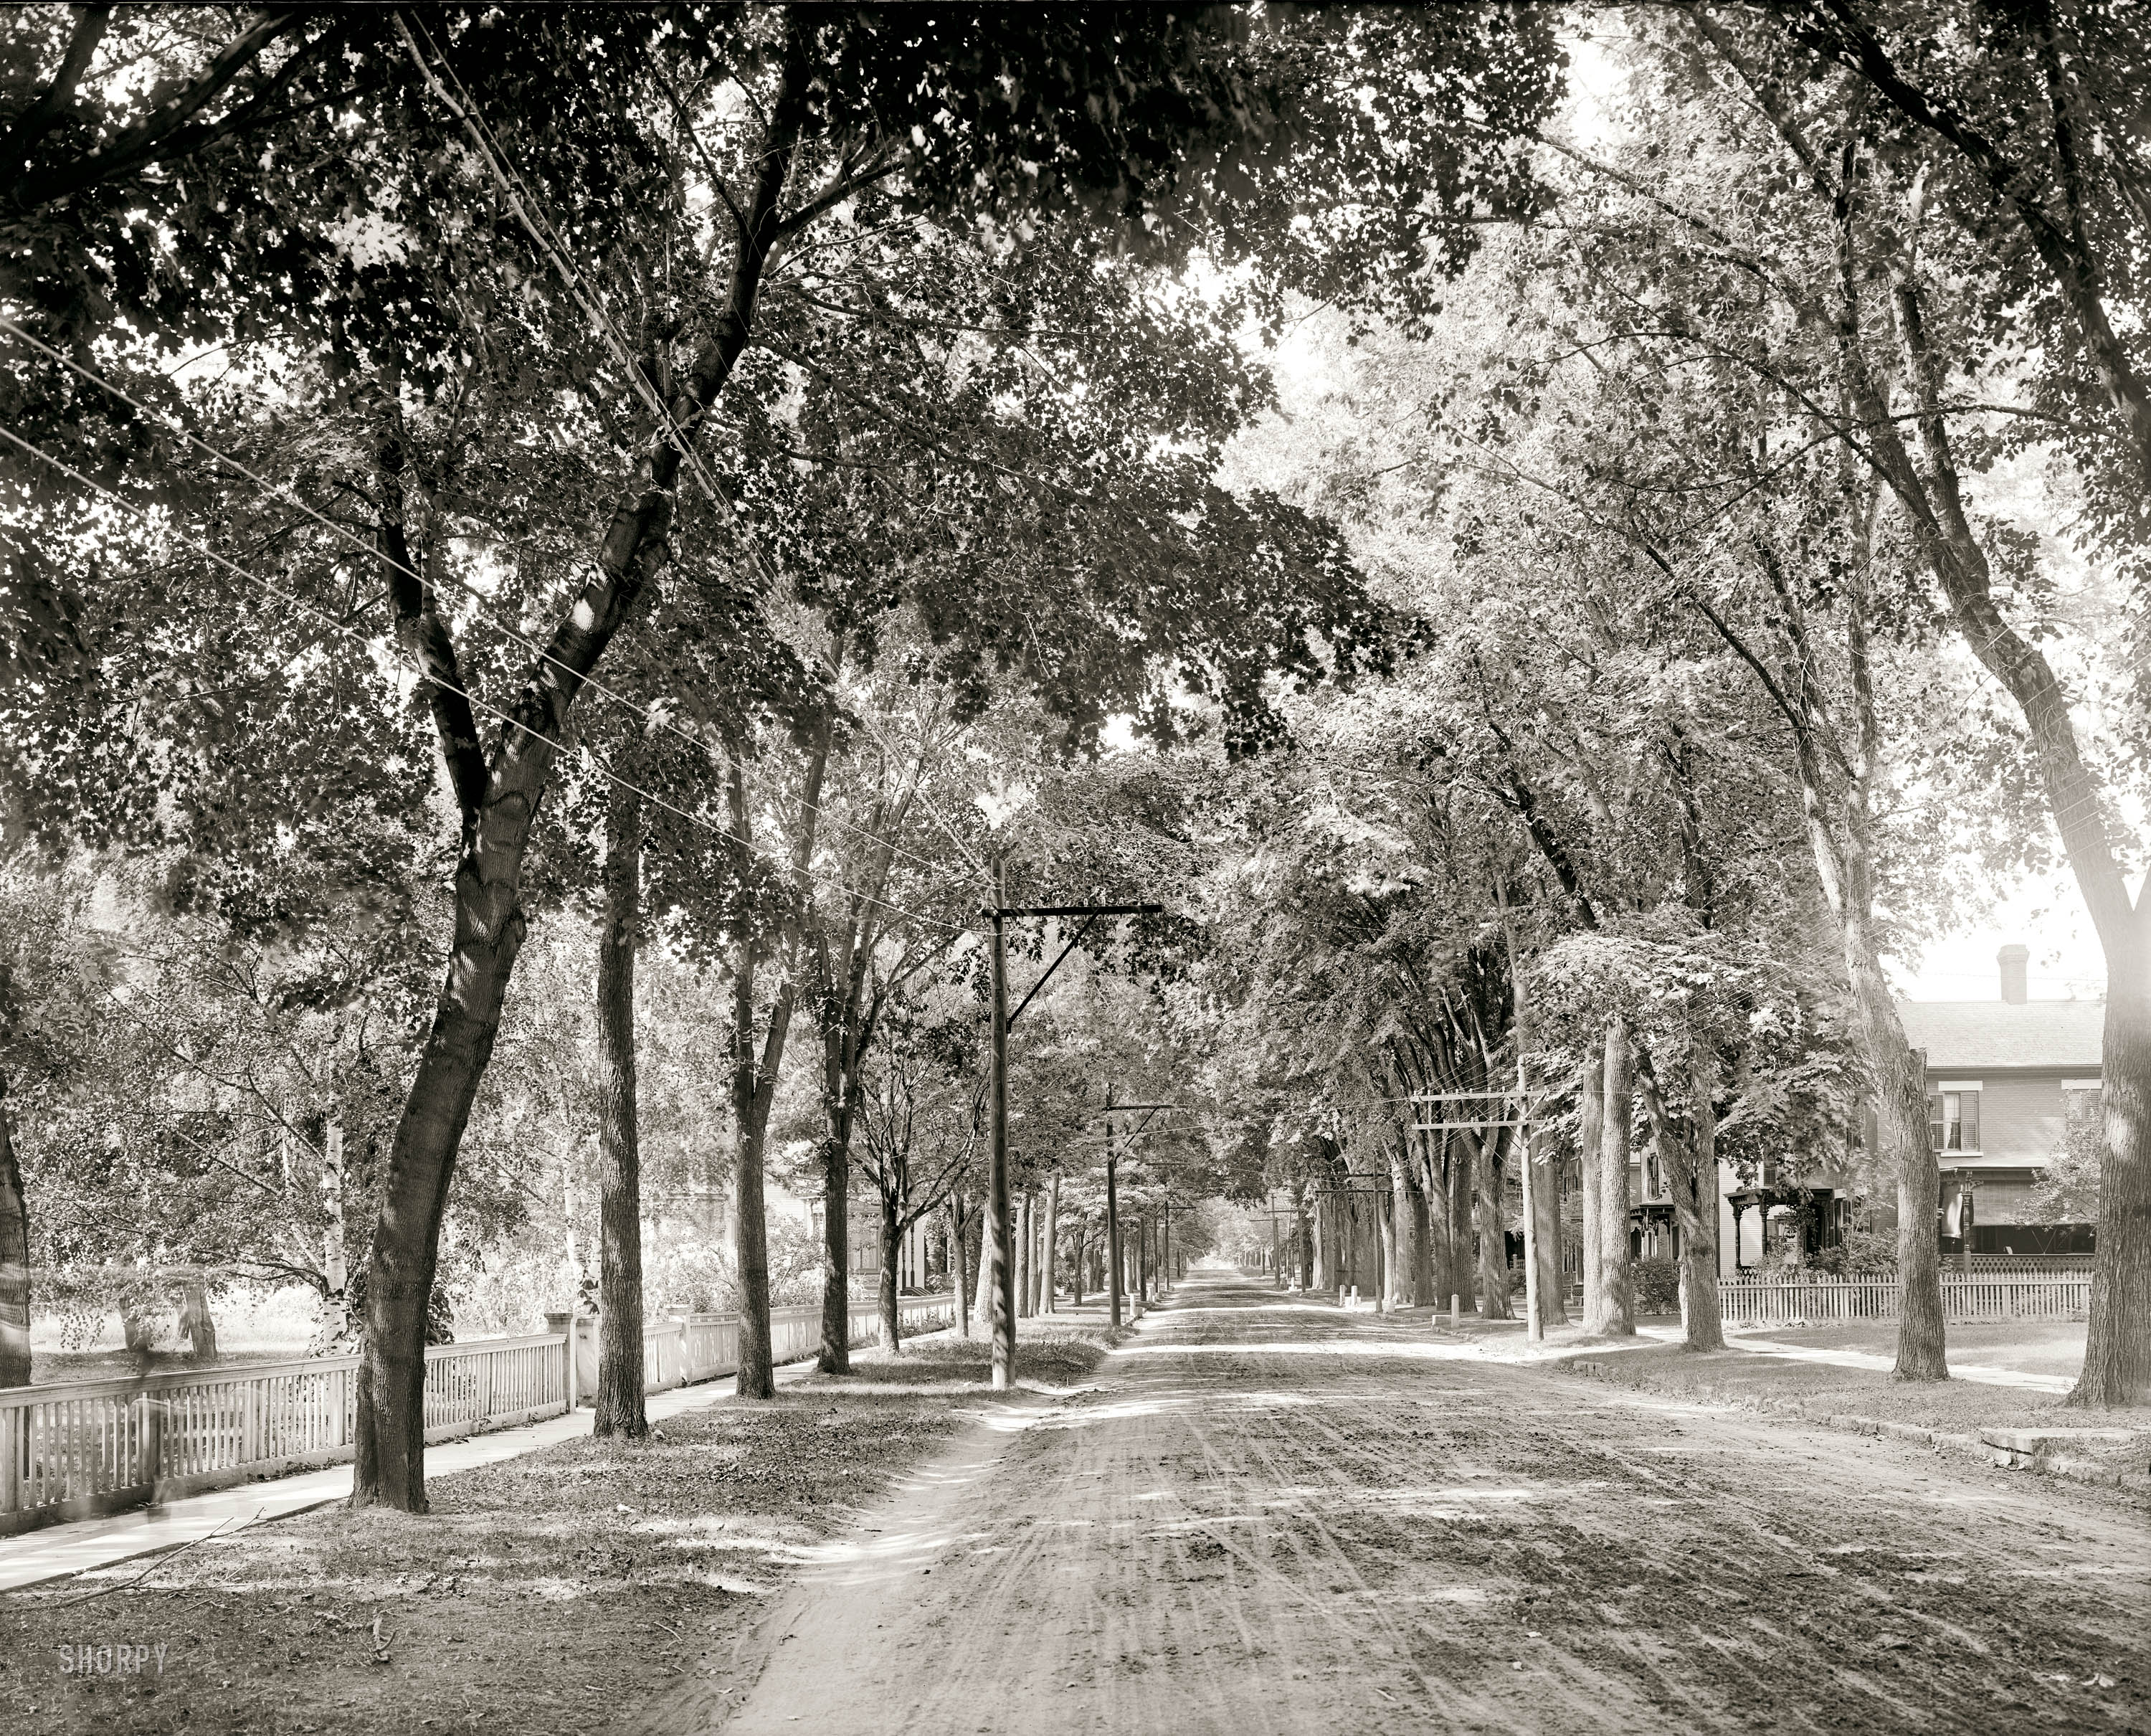 Plattsburgh, New York, circa 1906. "Brinkerhoff Street, west from Park." 8x10 inch dry plate glass negative, Detroit Publishing Company. View full size.